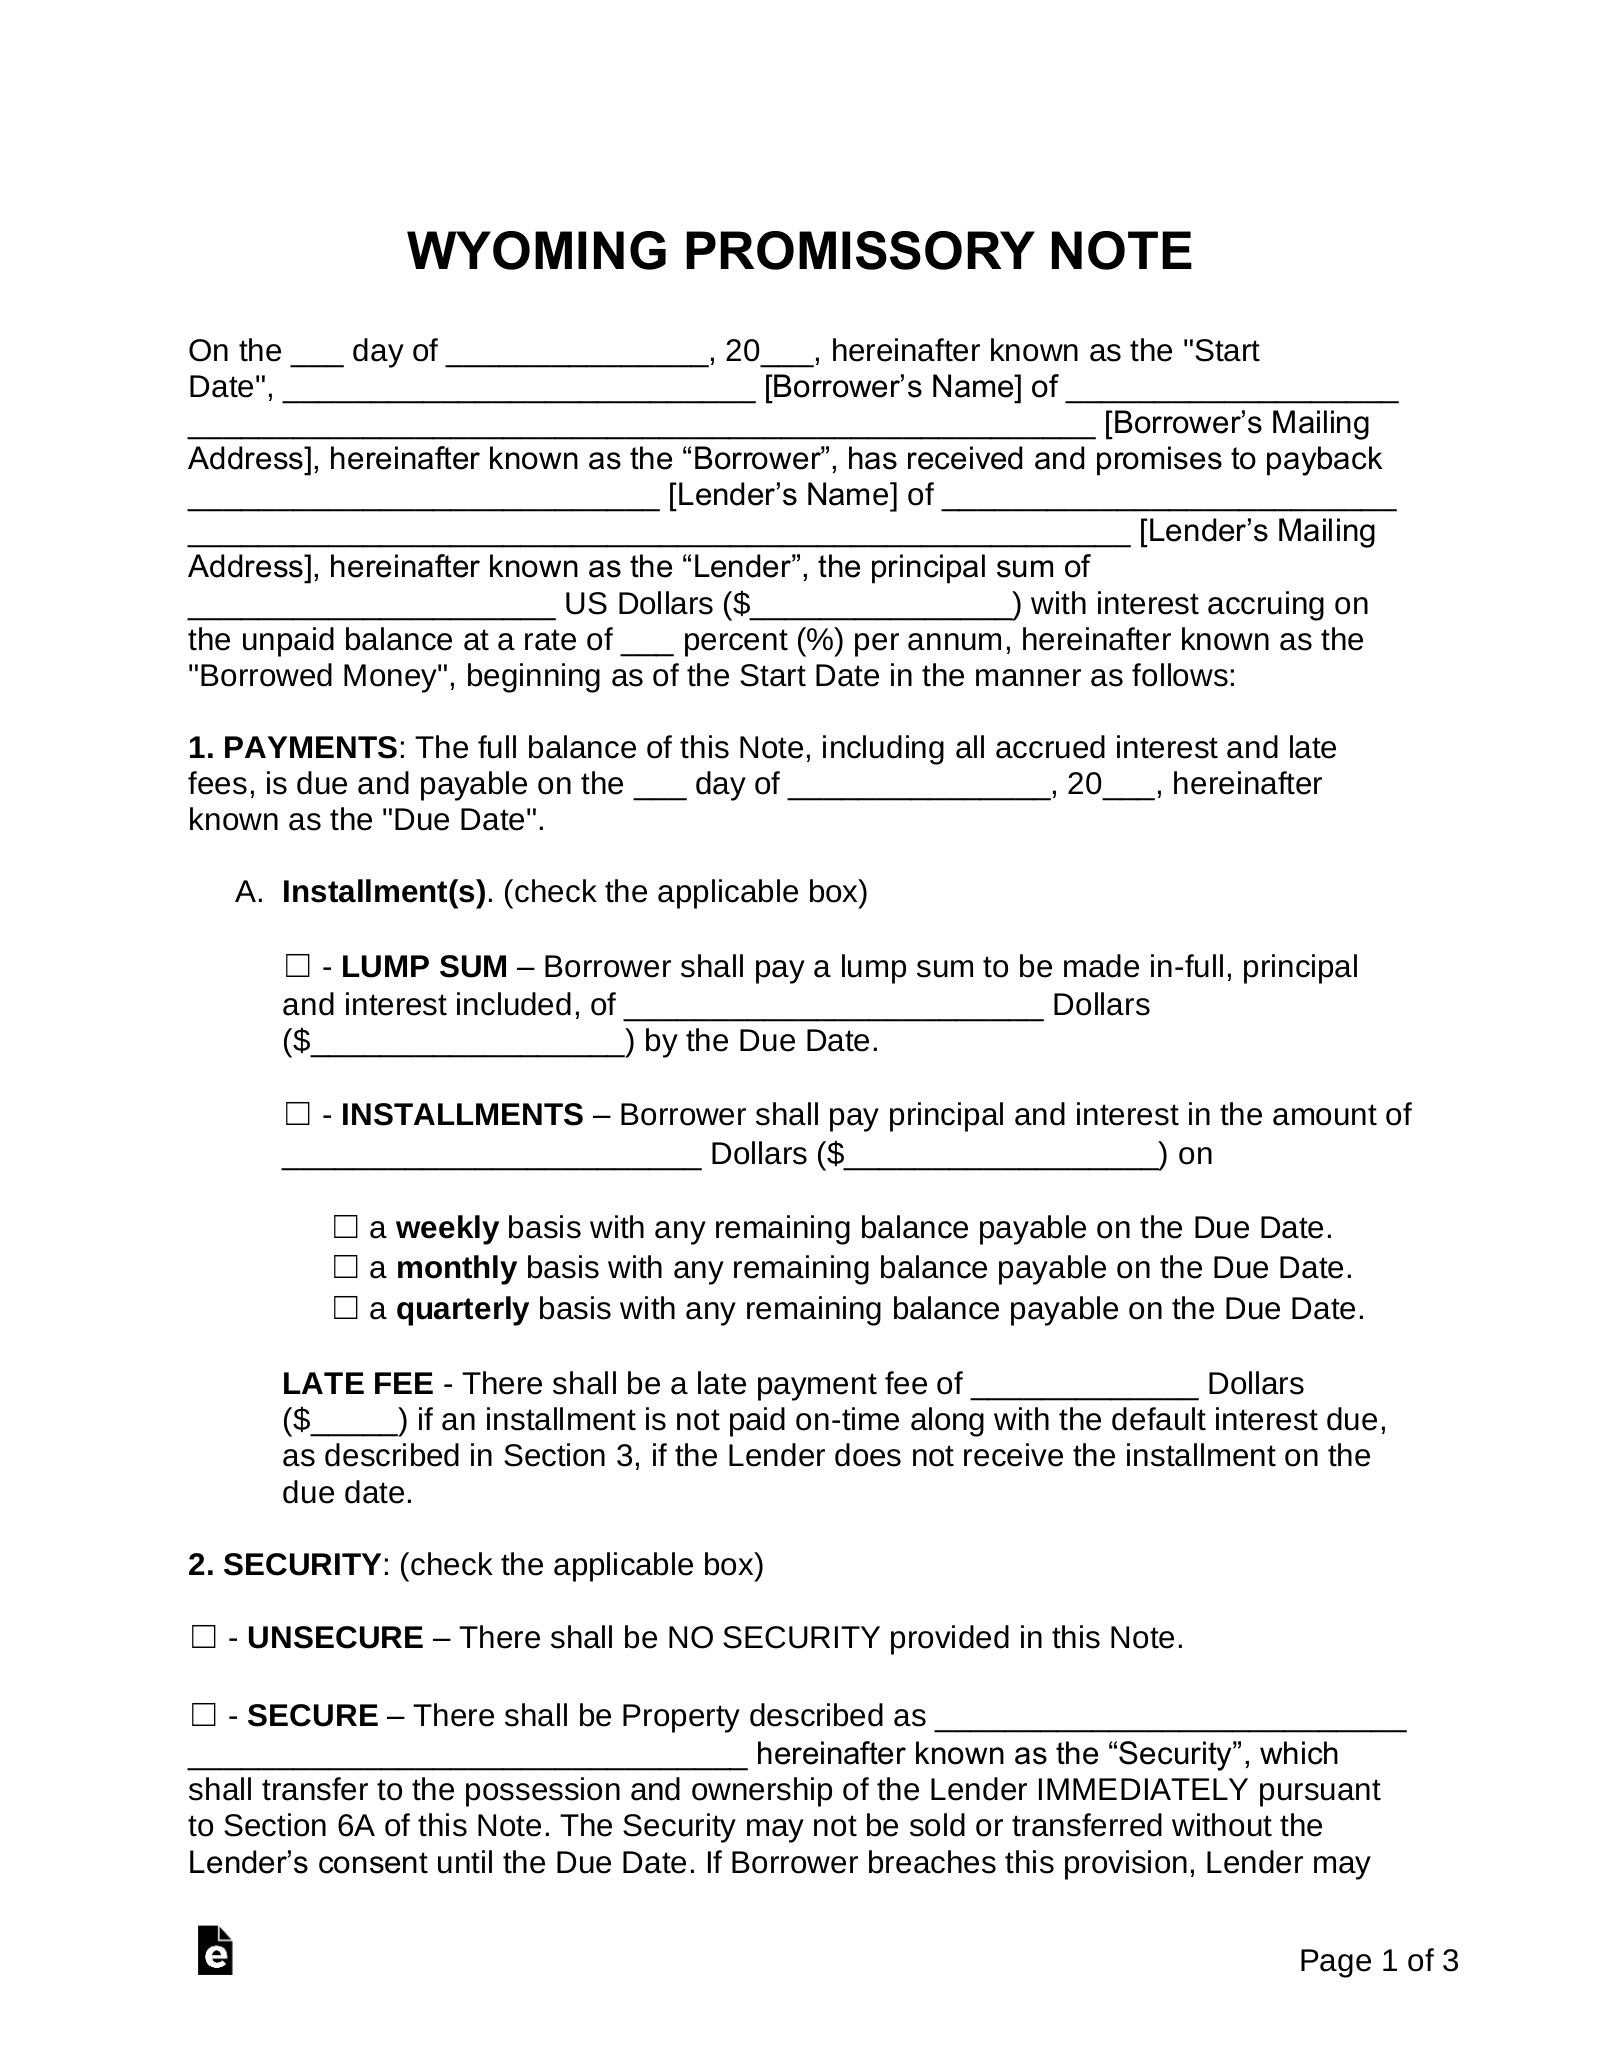 Wyoming Promissory Note Templates (2)